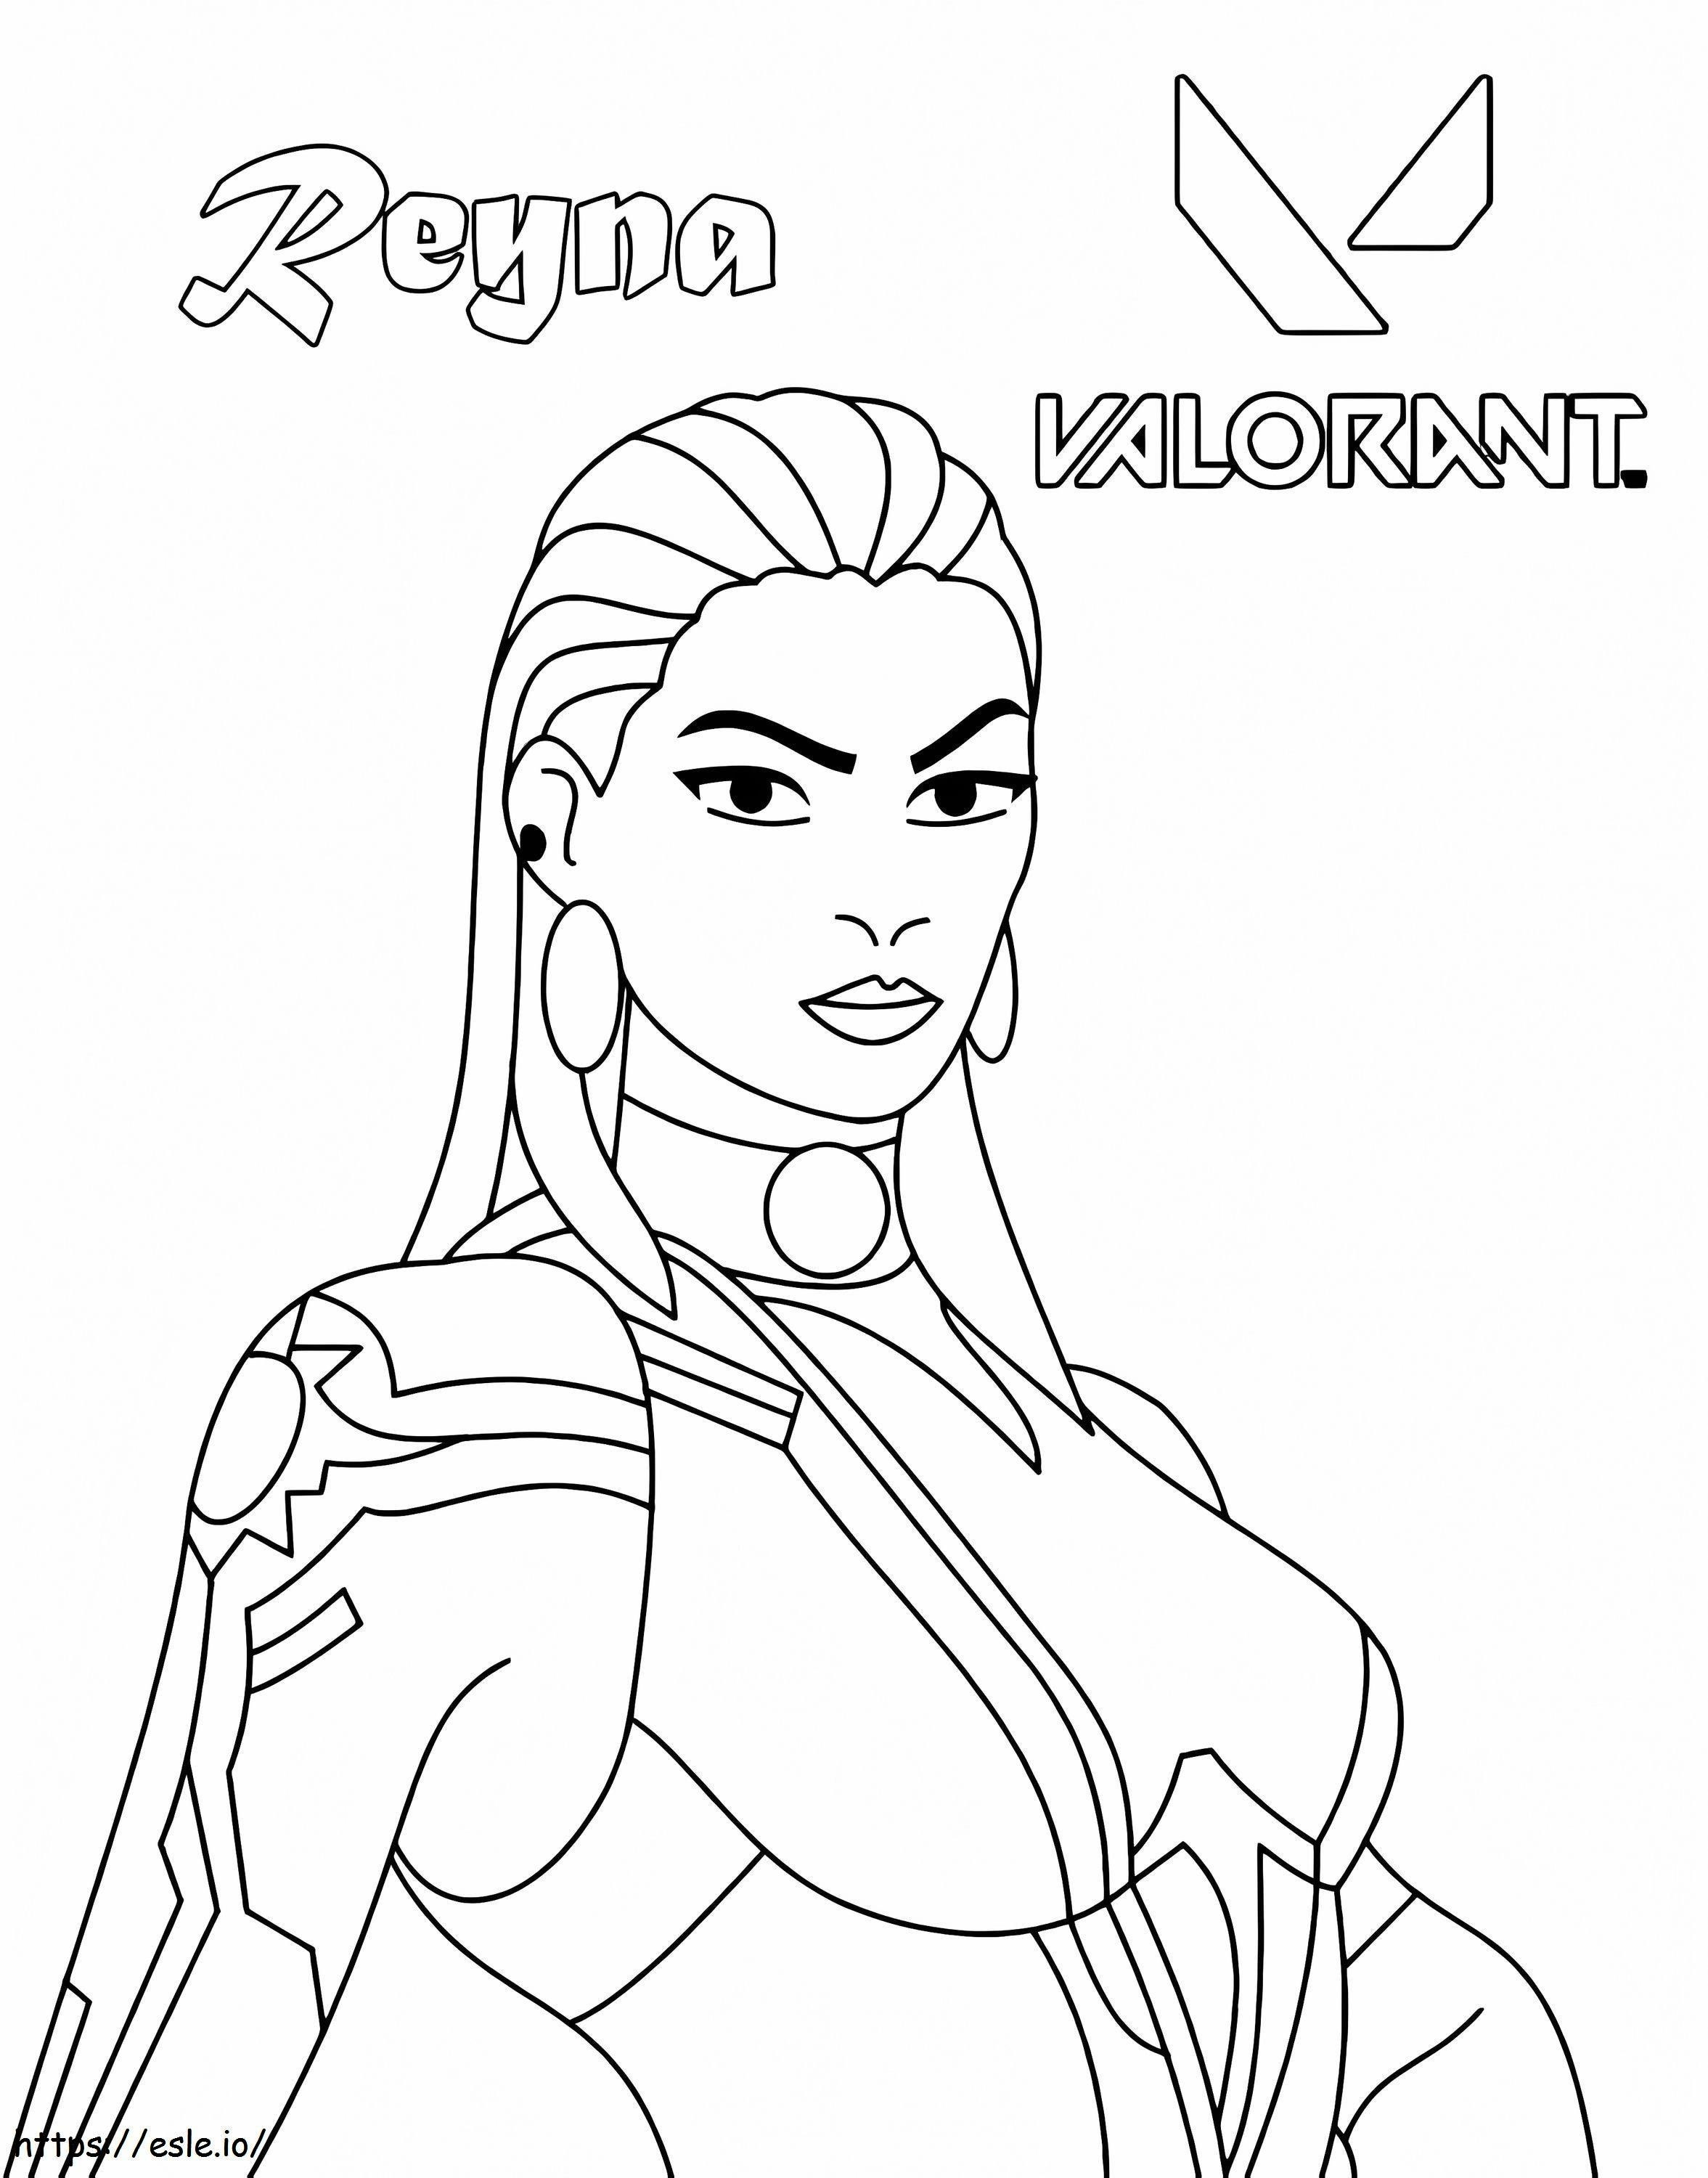 Reyna From Valorant coloring page